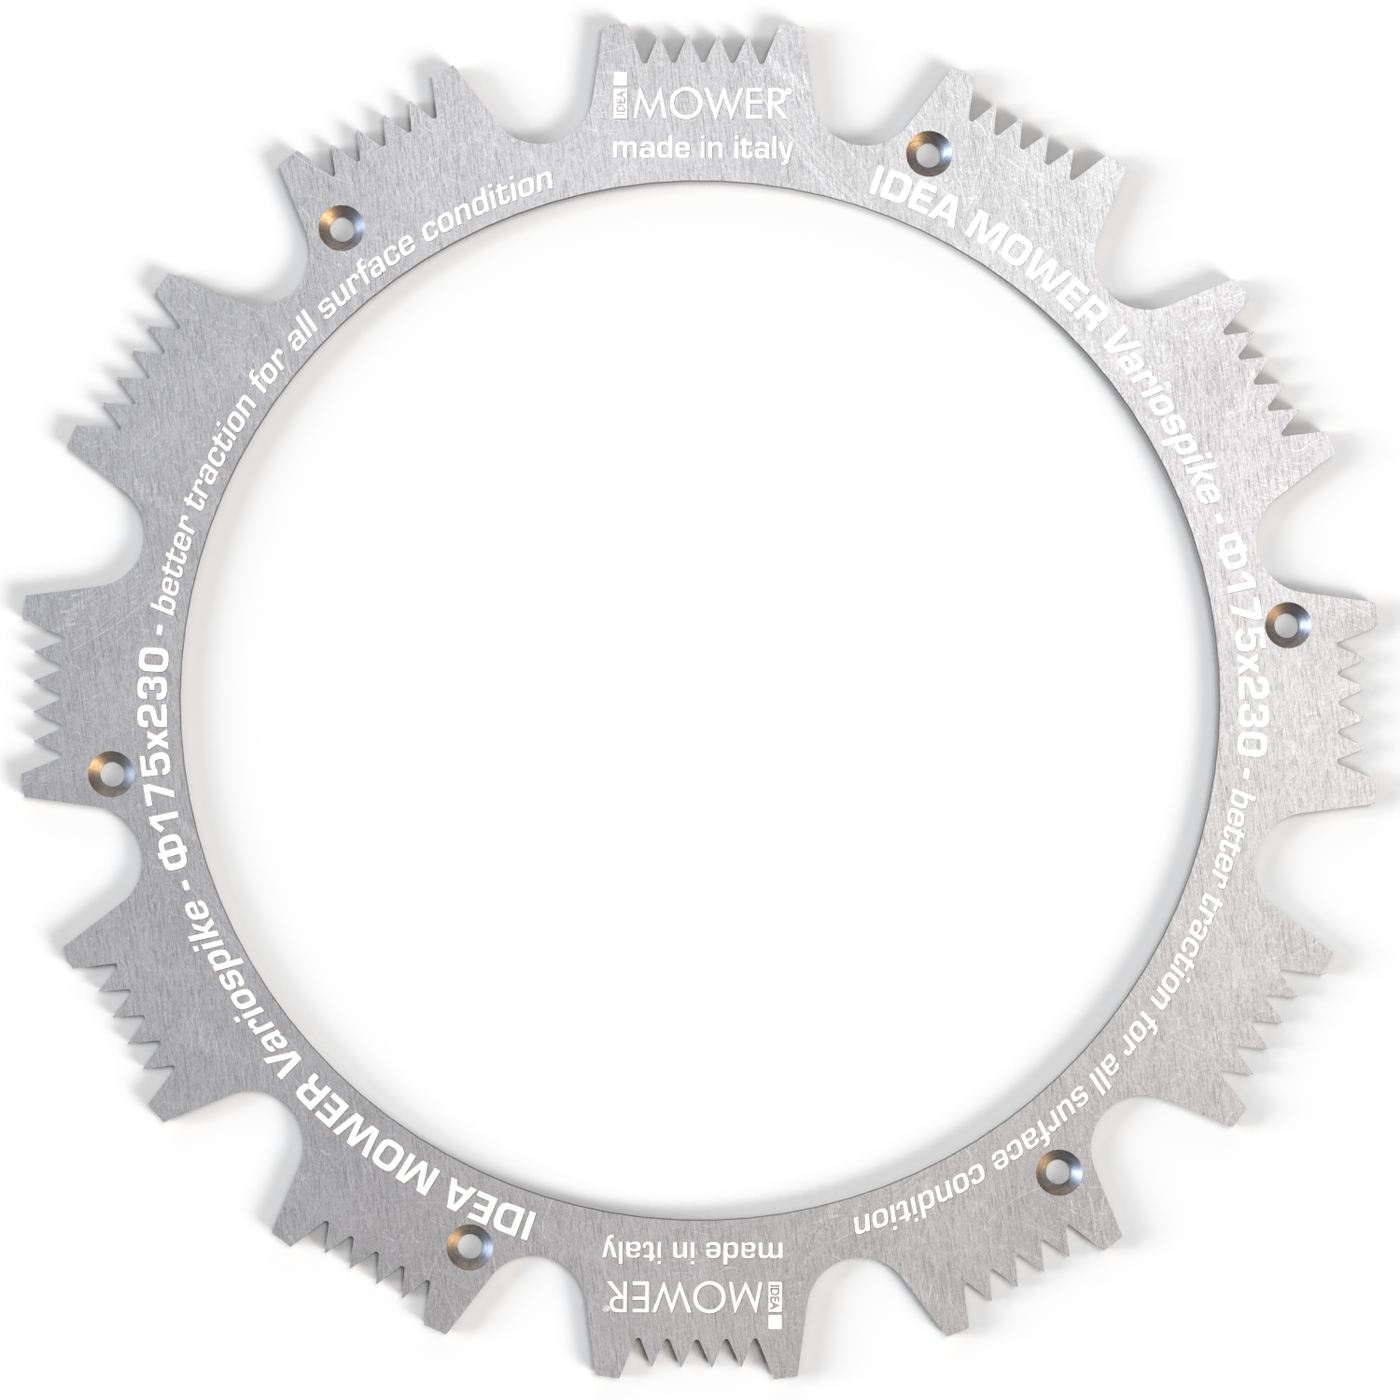 VarioSpike - Gear wheels for Worx Landroid L & Vision